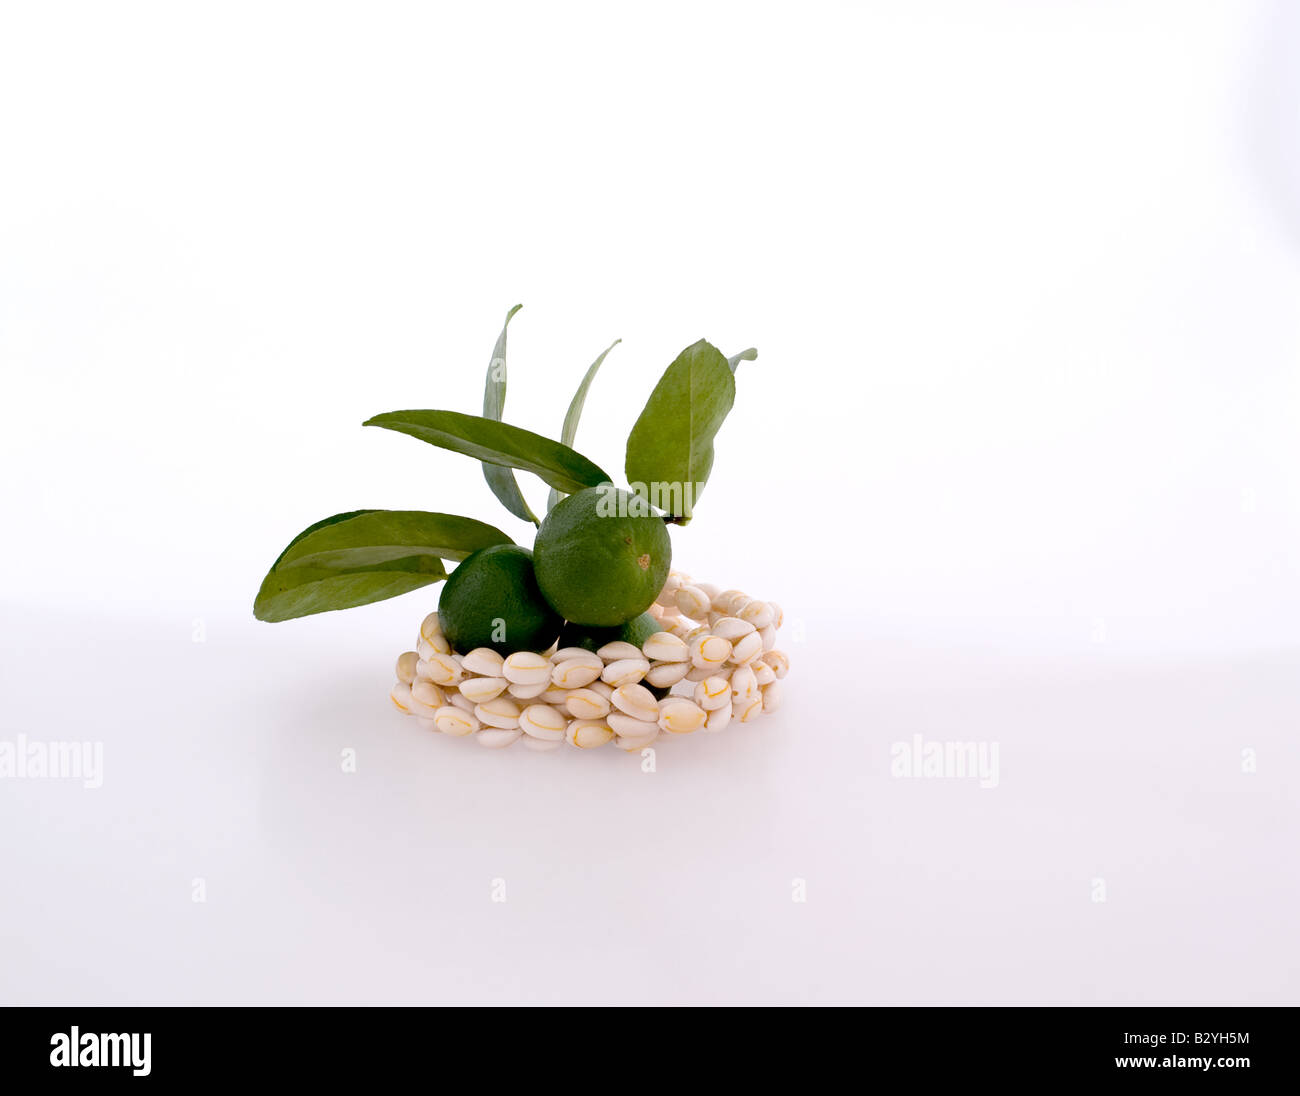 Key lime tree branch and fruit atop a shell necklace Stock Photo